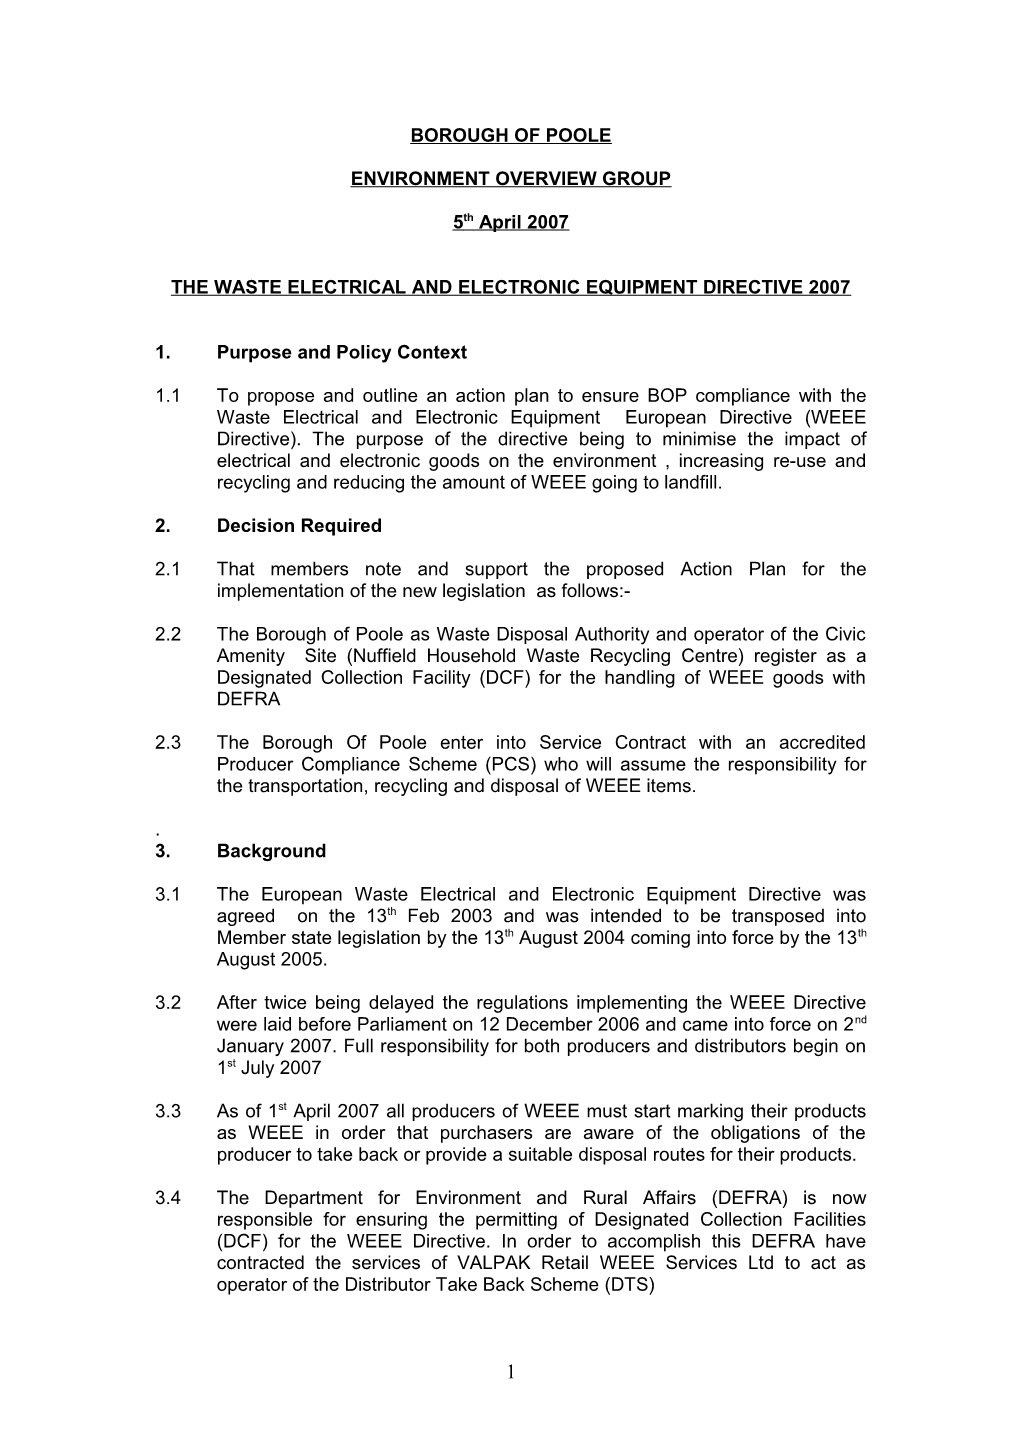 The Waste Electrical and Electronic Equipment Directive 2007